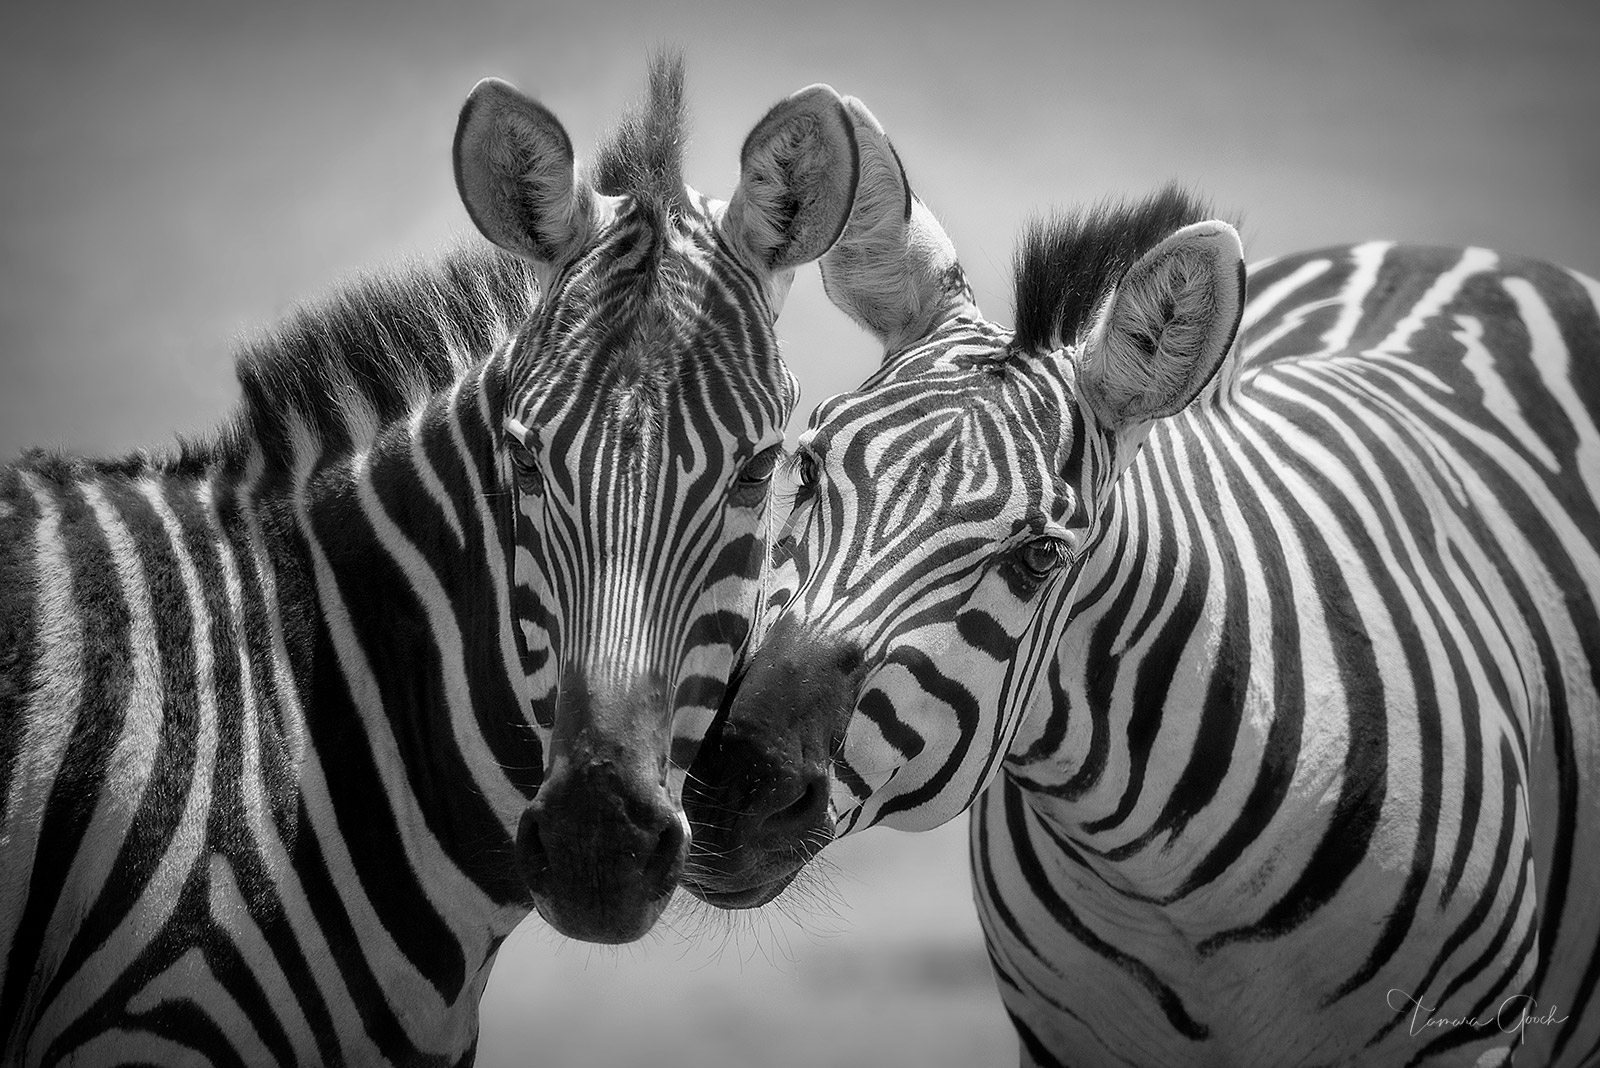 A black and white fine art limited edition wildlife print of two zebras interacting.